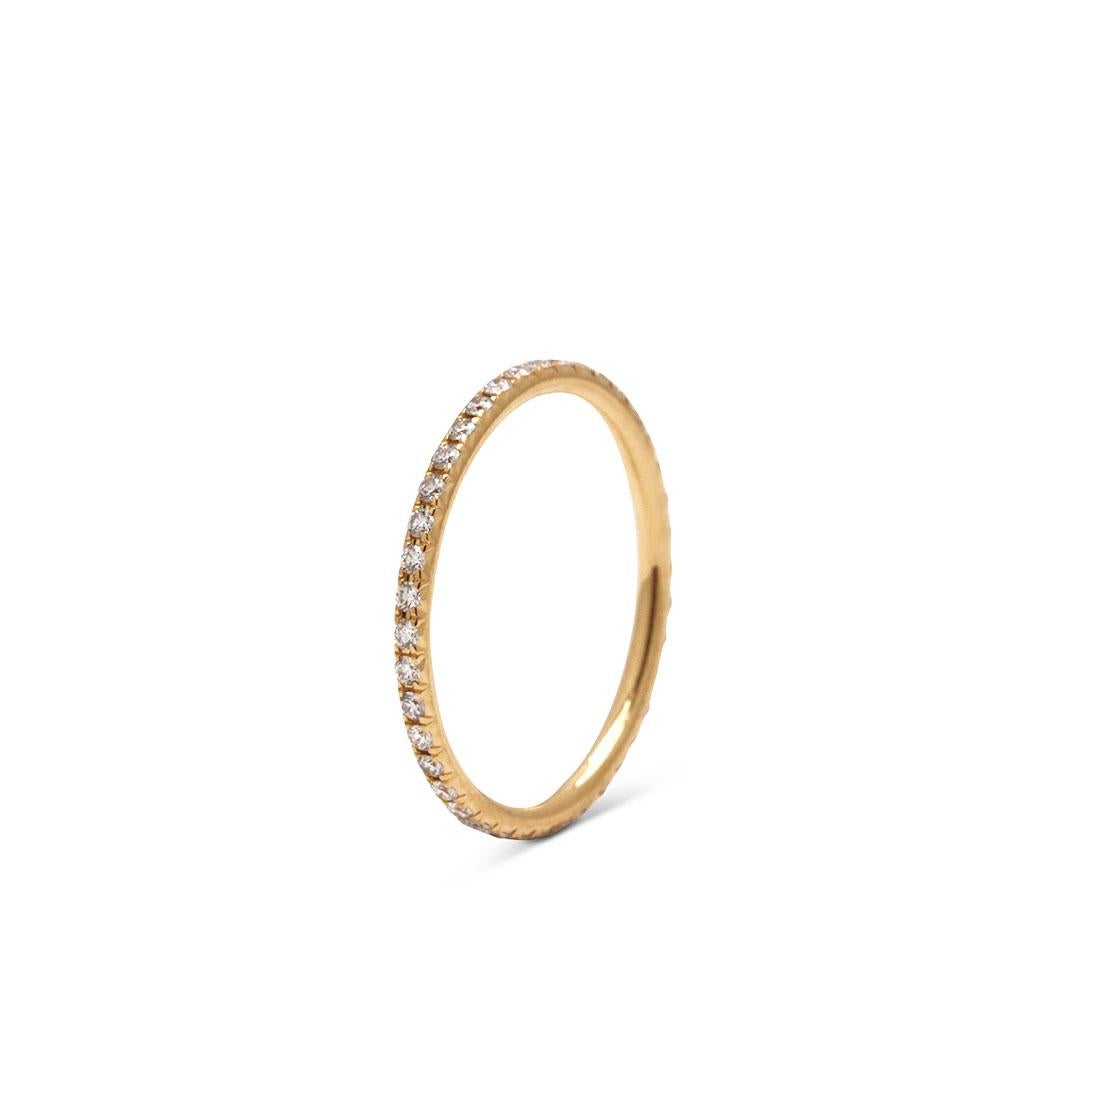 Authentic Tiffany & Co. 'Soleste' eternity band crafted in 18 karat yellow gold and set with approximately 0.42 carats of glittering round brilliant cut diamonds. US Size 5. Signed Tiffany & Co., 750, Belgium. Ring is presented without the original